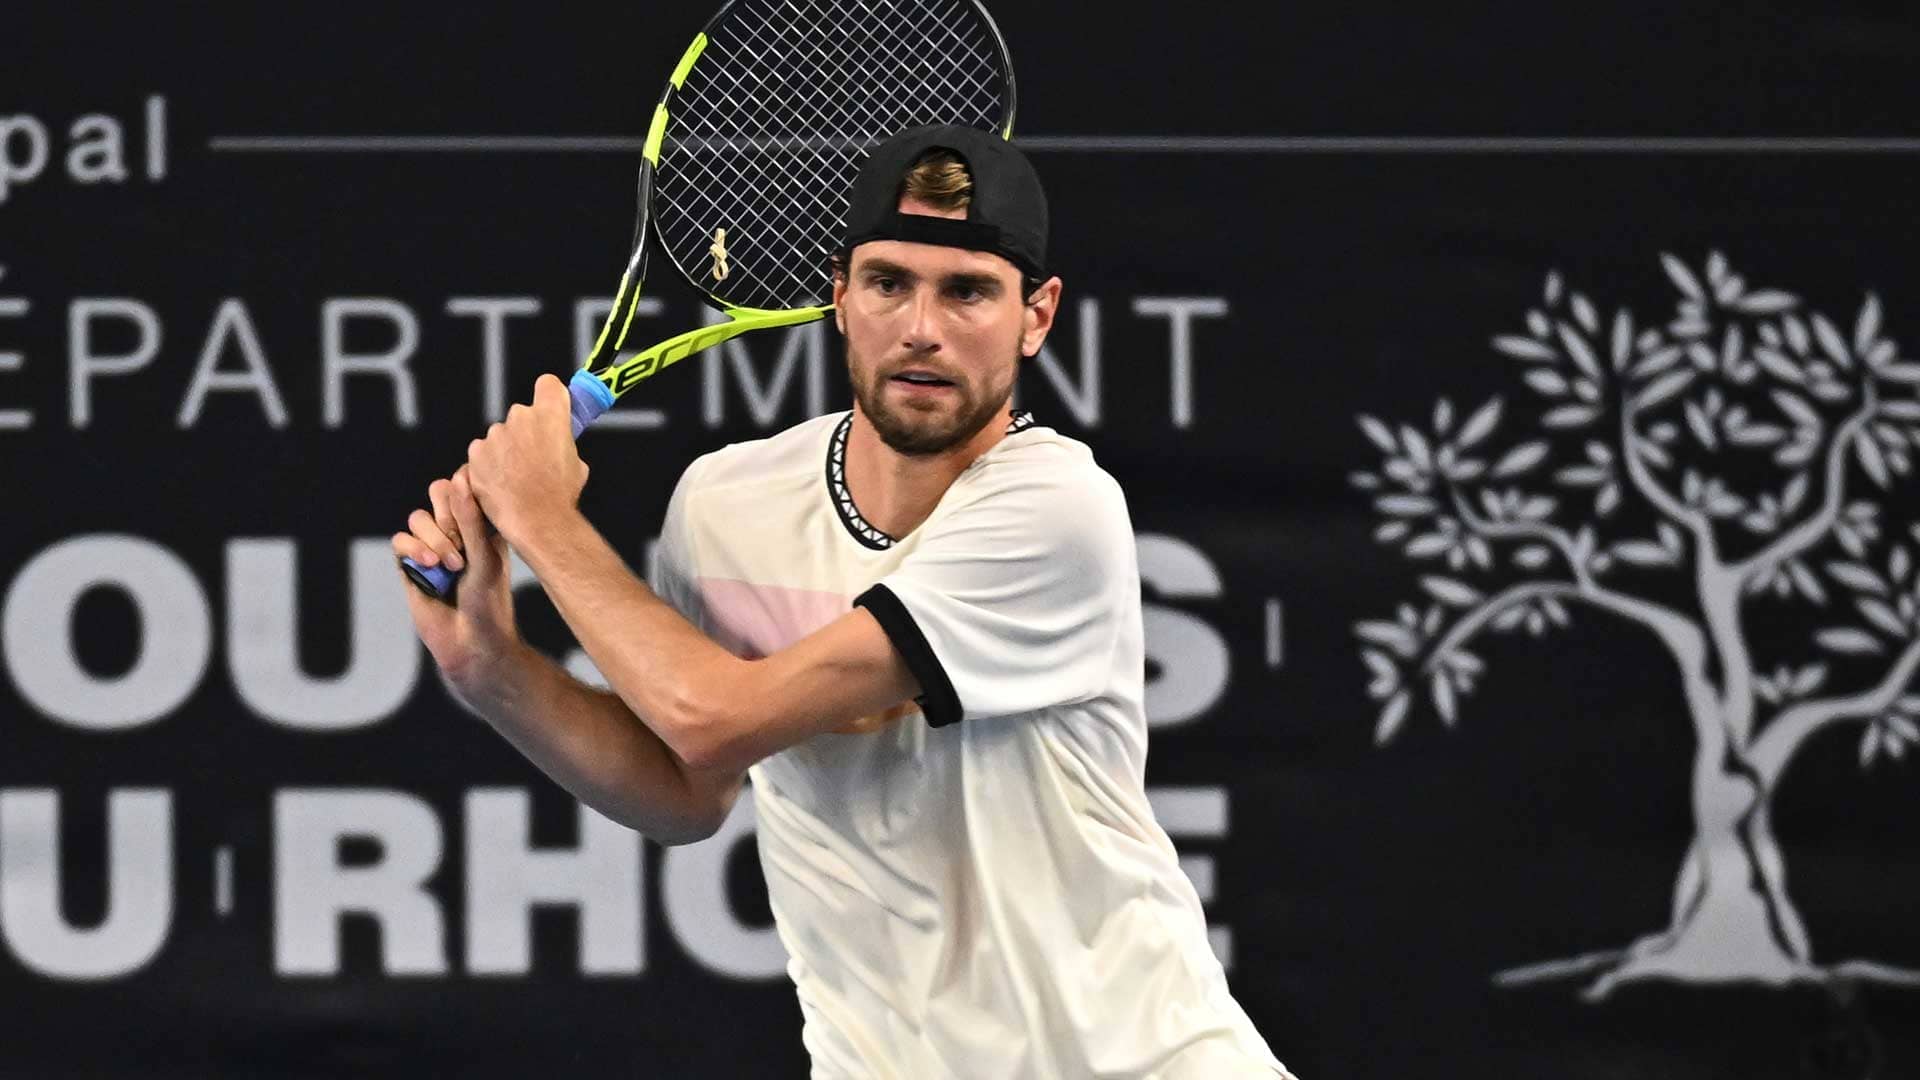 Maxime Cressy Lets Go and Claws Into Marseille Second Round ATP Tour Tennis